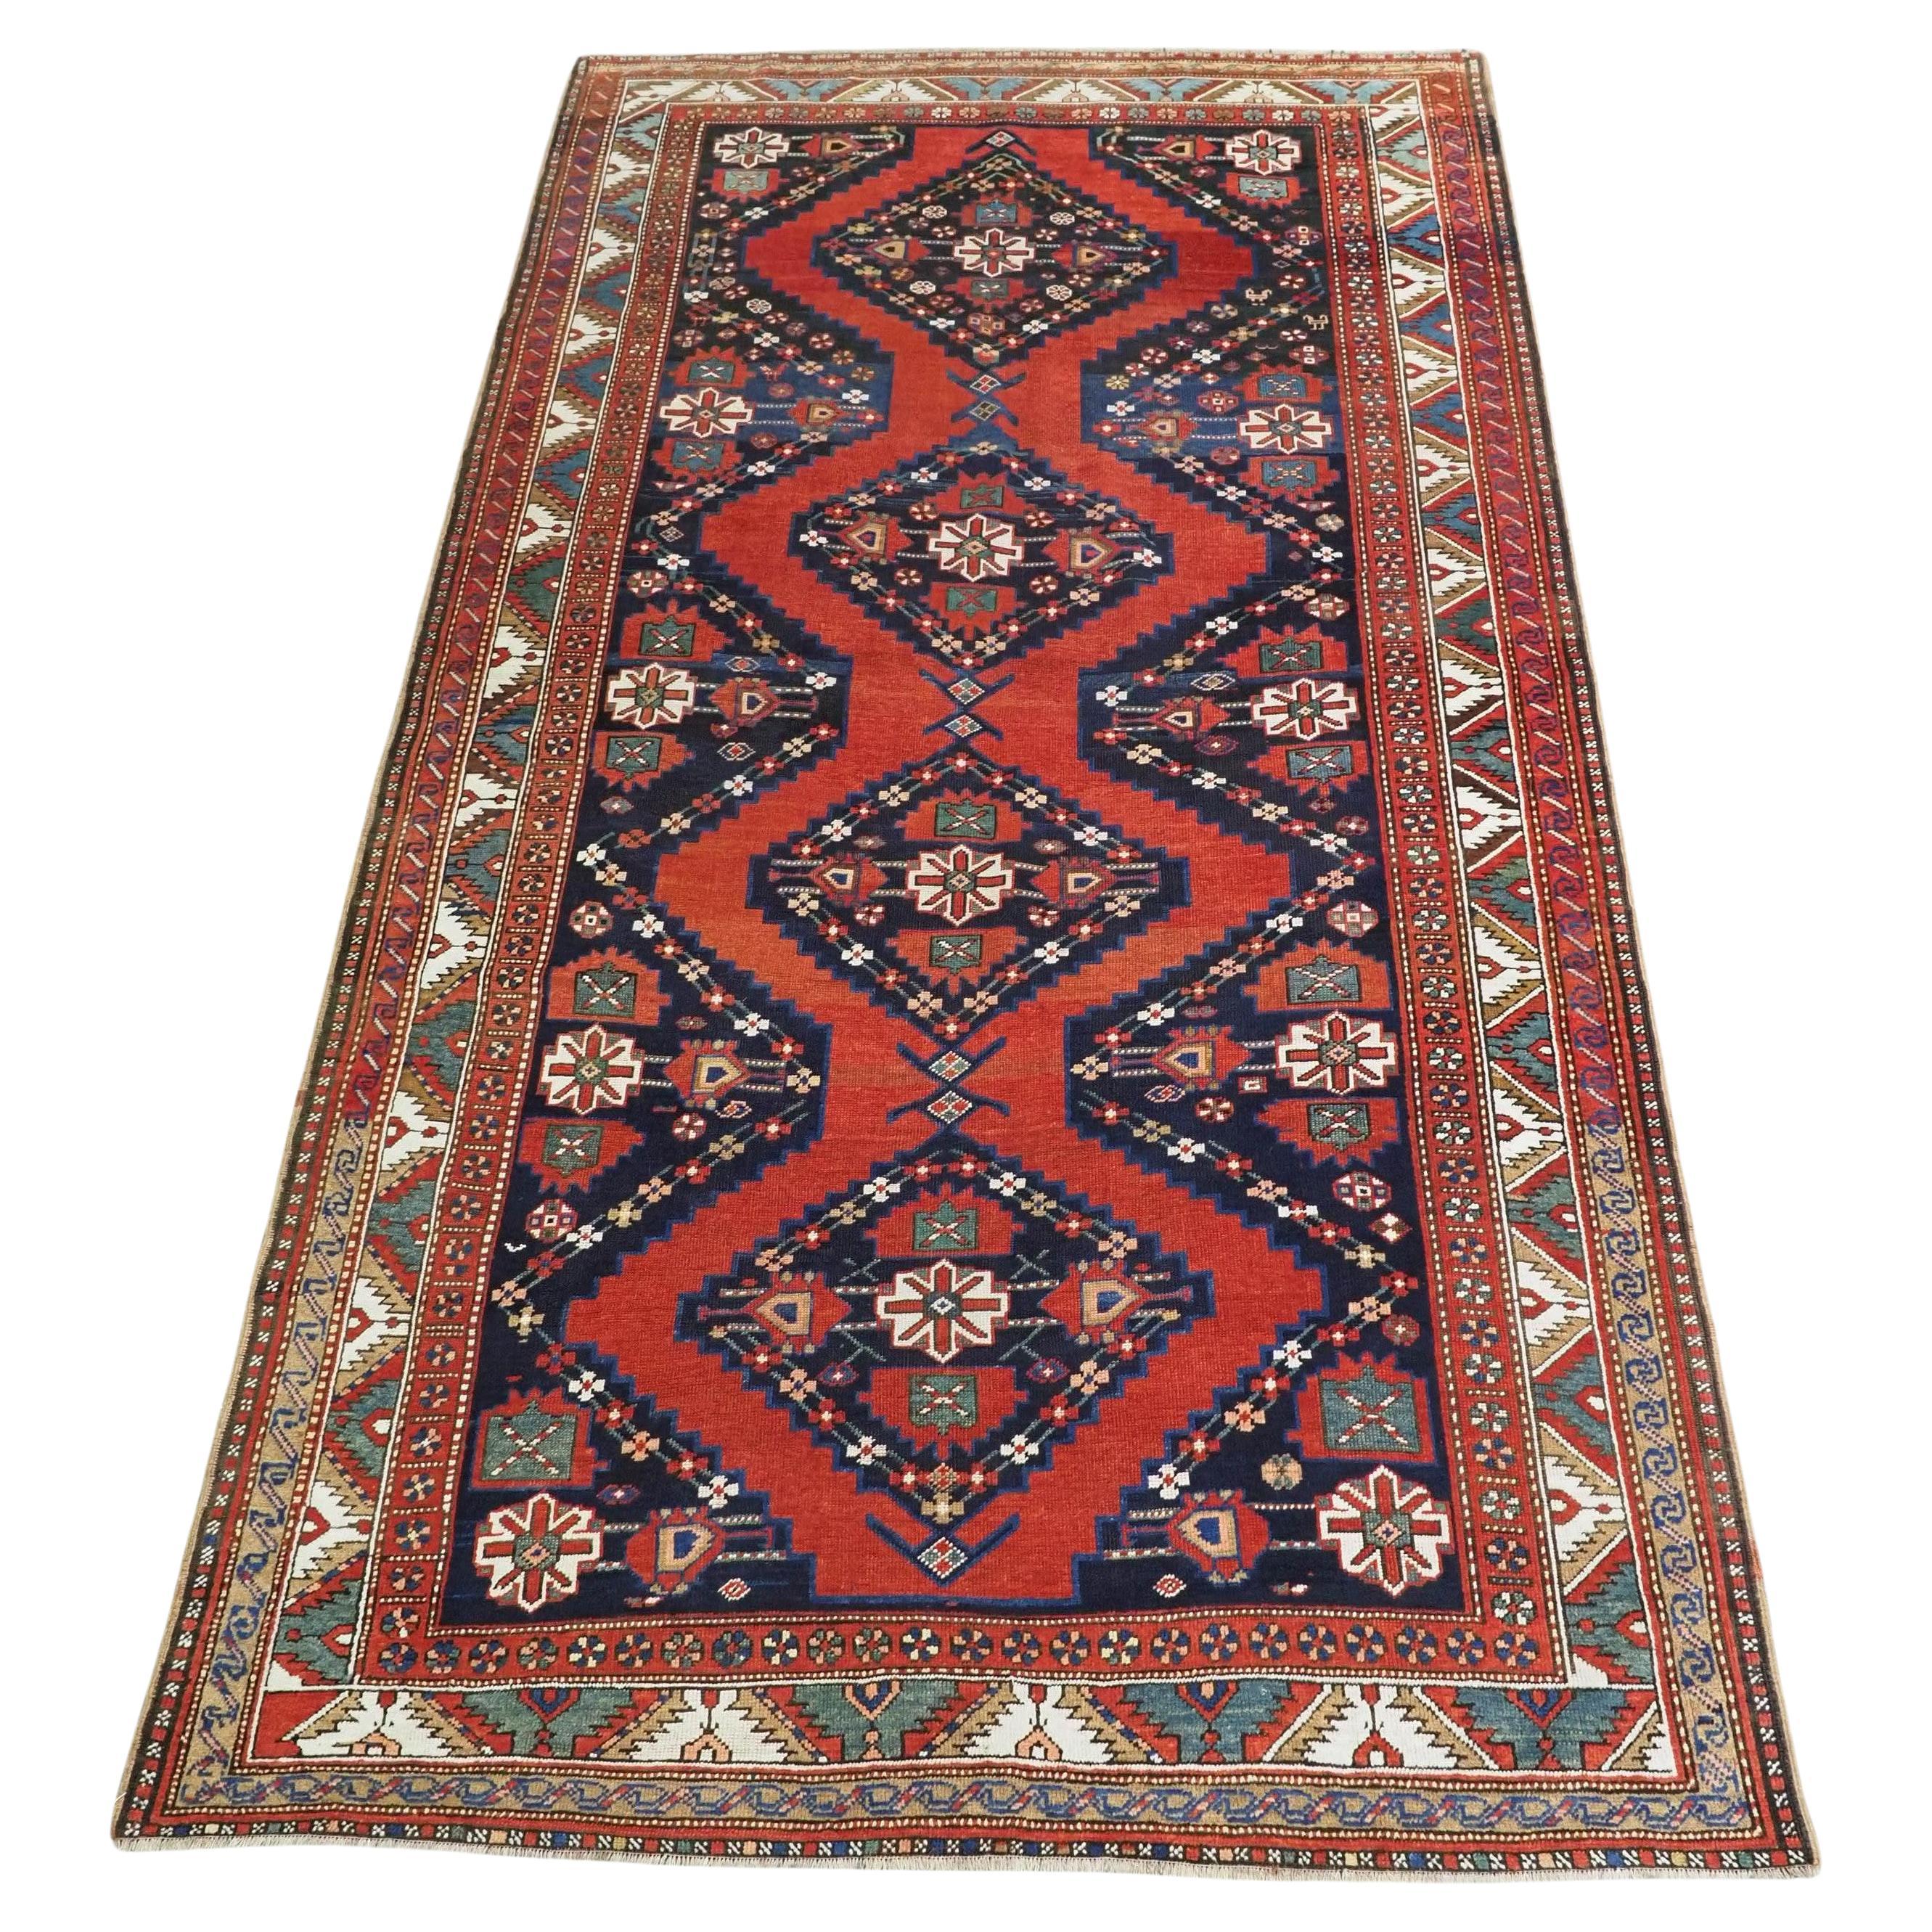 Early 1900s Caucasian Rugs